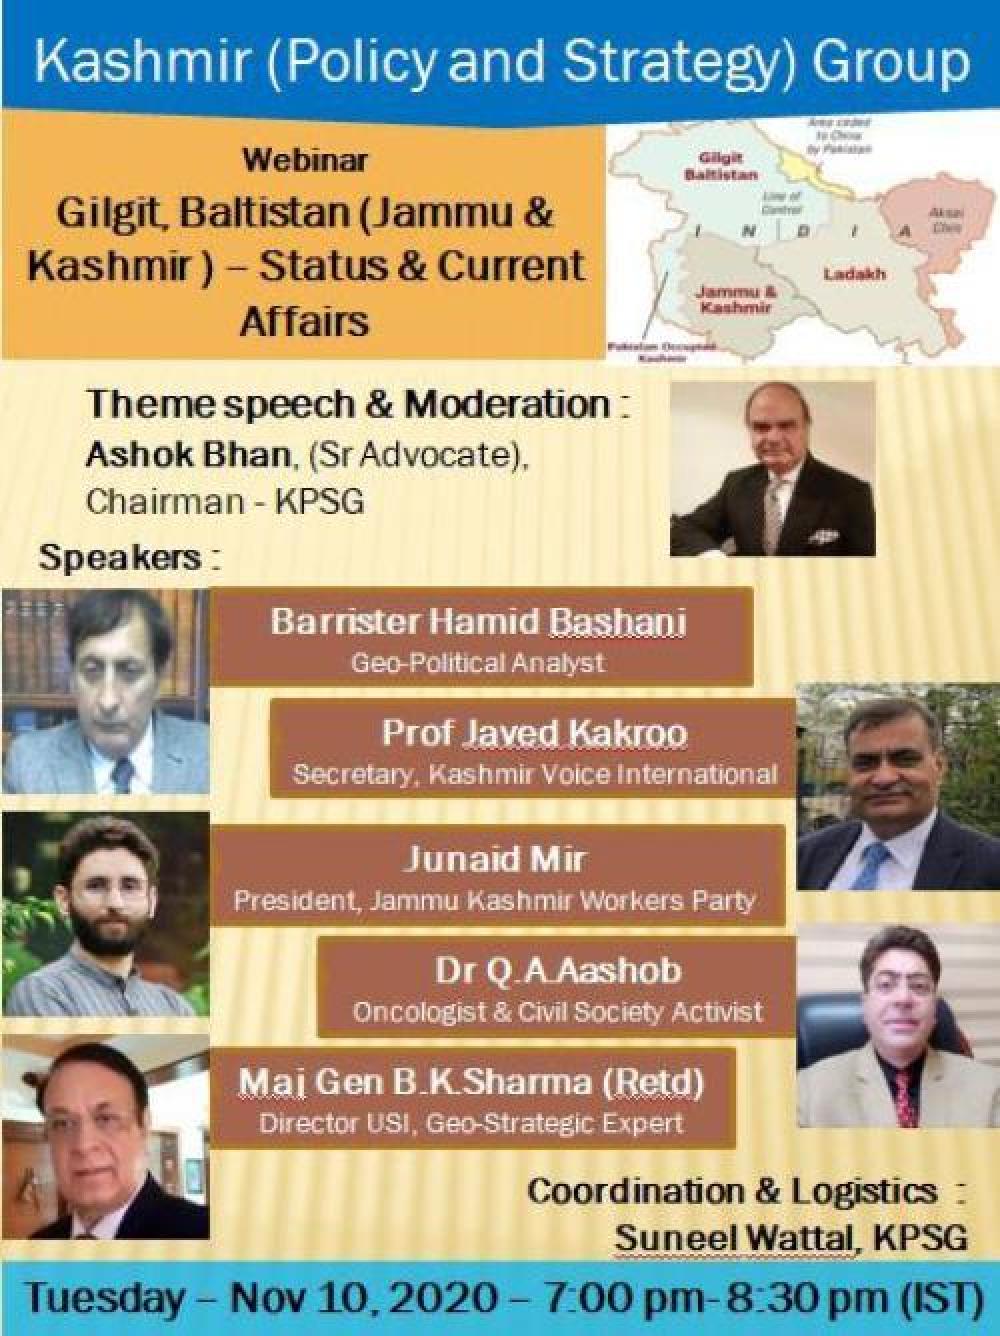 Gilgit Baltistan under illegal occupation of Pakistan since 1947, say experts at a webinar